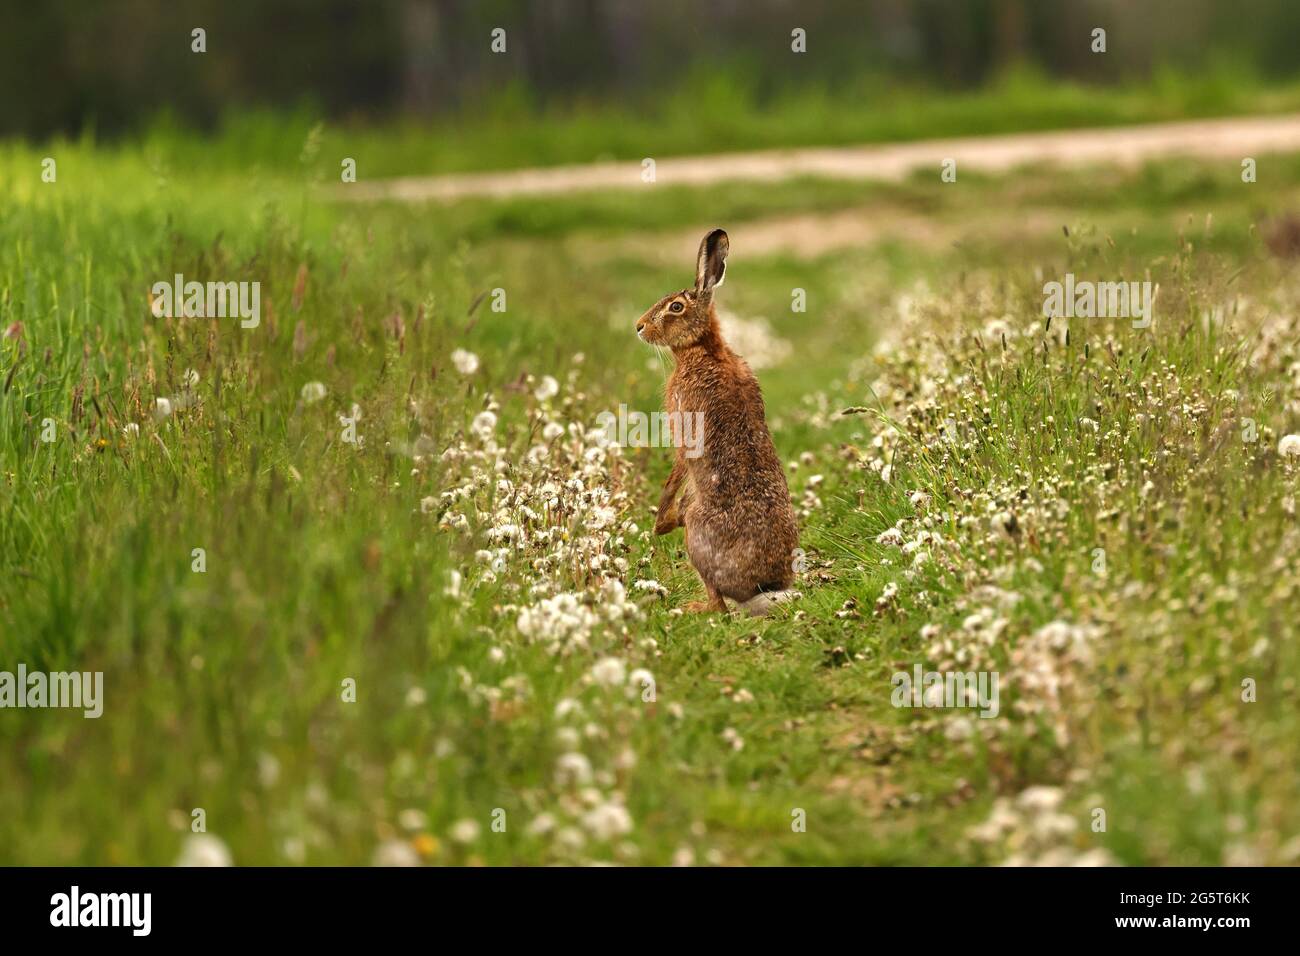 European hare, Brown hare (Lepus europaeus), stands erect on a field path looking around, Germany, Baden-Wuerttemberg Stock Photo